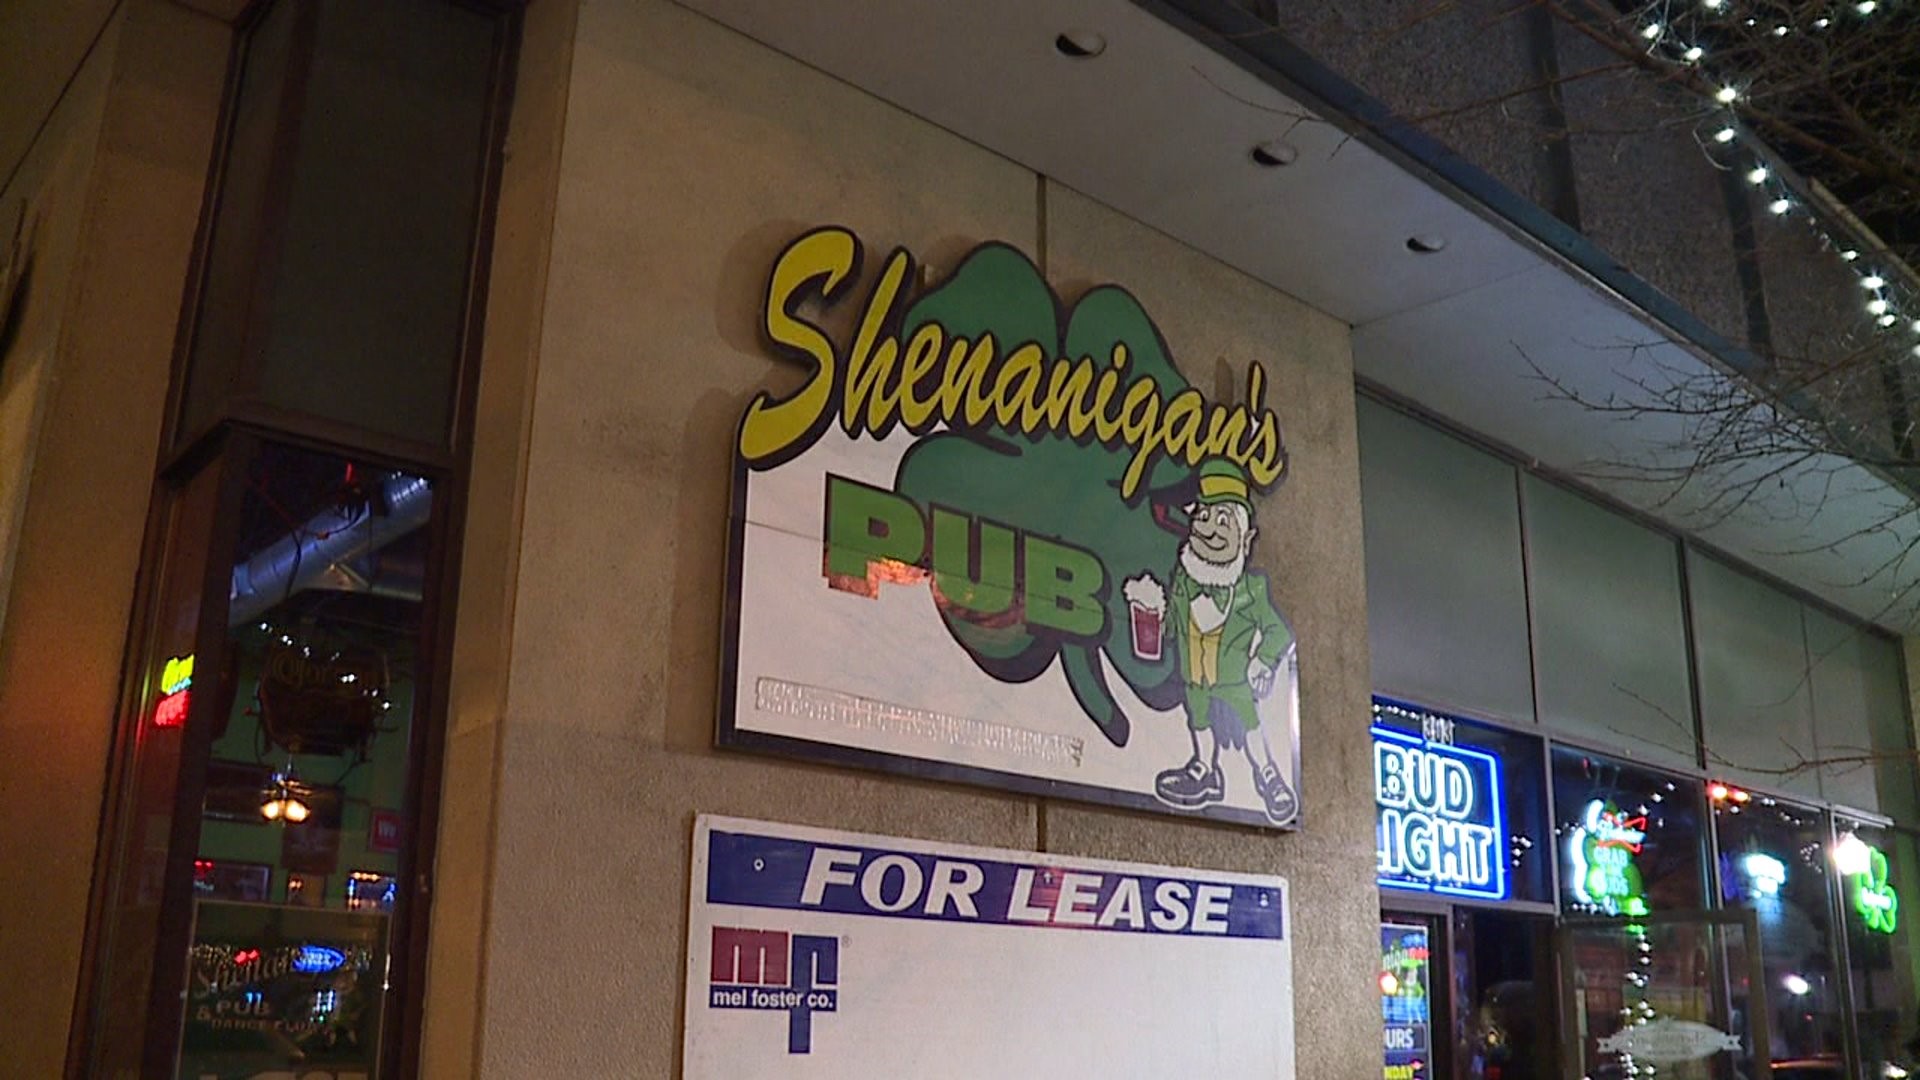 Shenanigans closing on New Years Eve